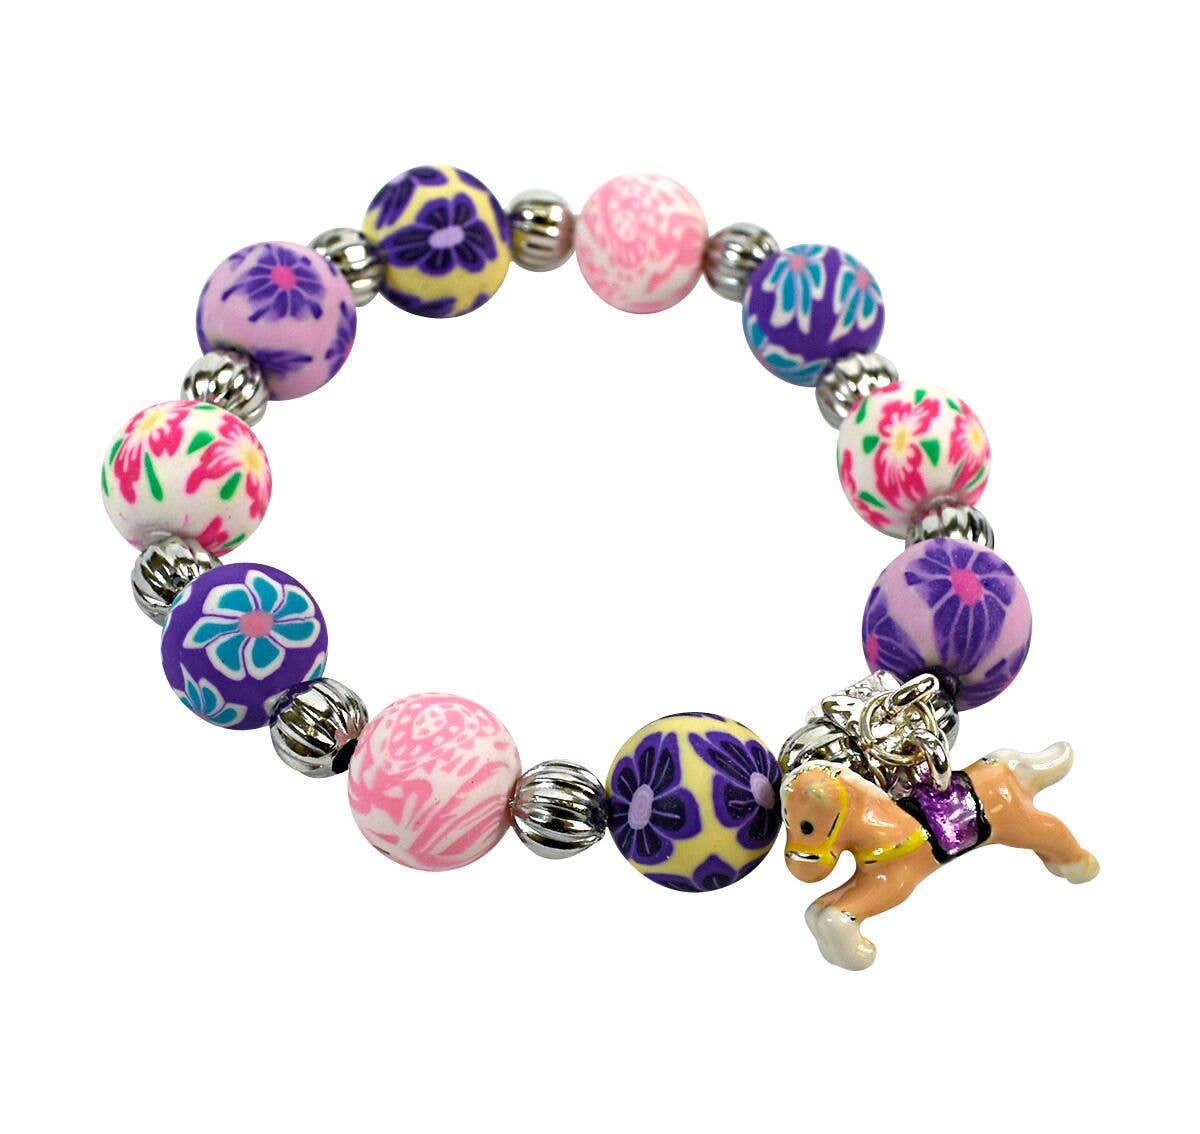 Girl's Jewelry Bracelet with Horse Charm